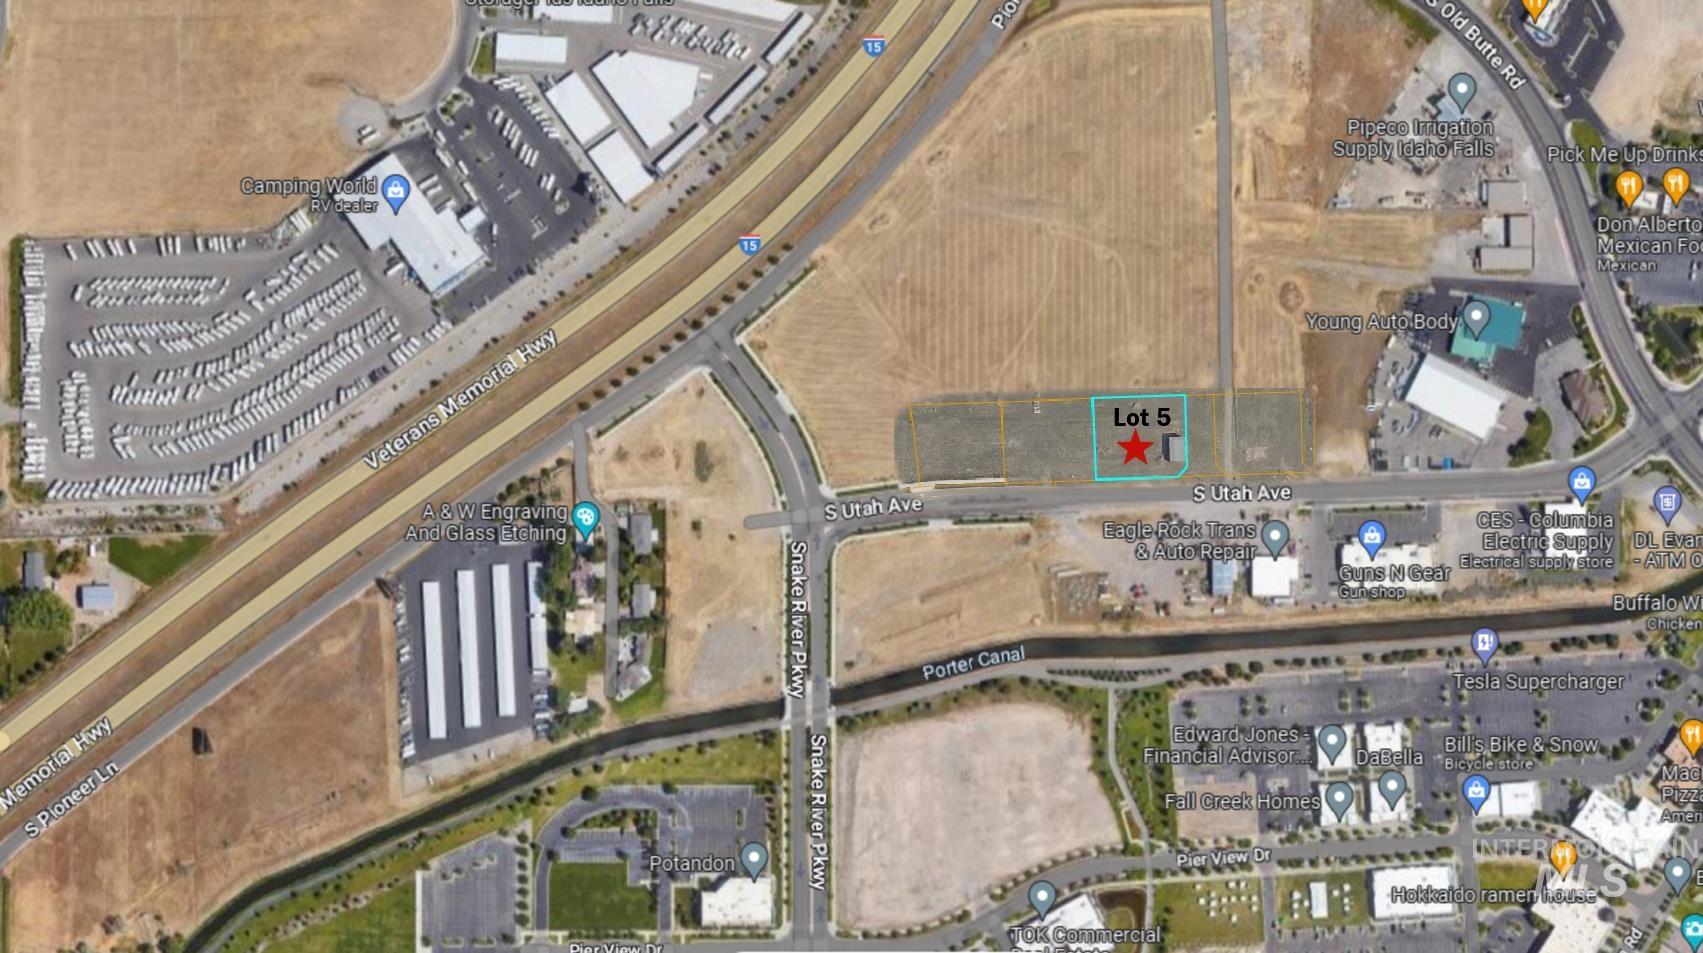 TBD S Utah Ave. Lot 6 Block 8, Idaho Falls, Idaho 83402, Business/Commercial For Sale, Price $312,560,MLS 98873736